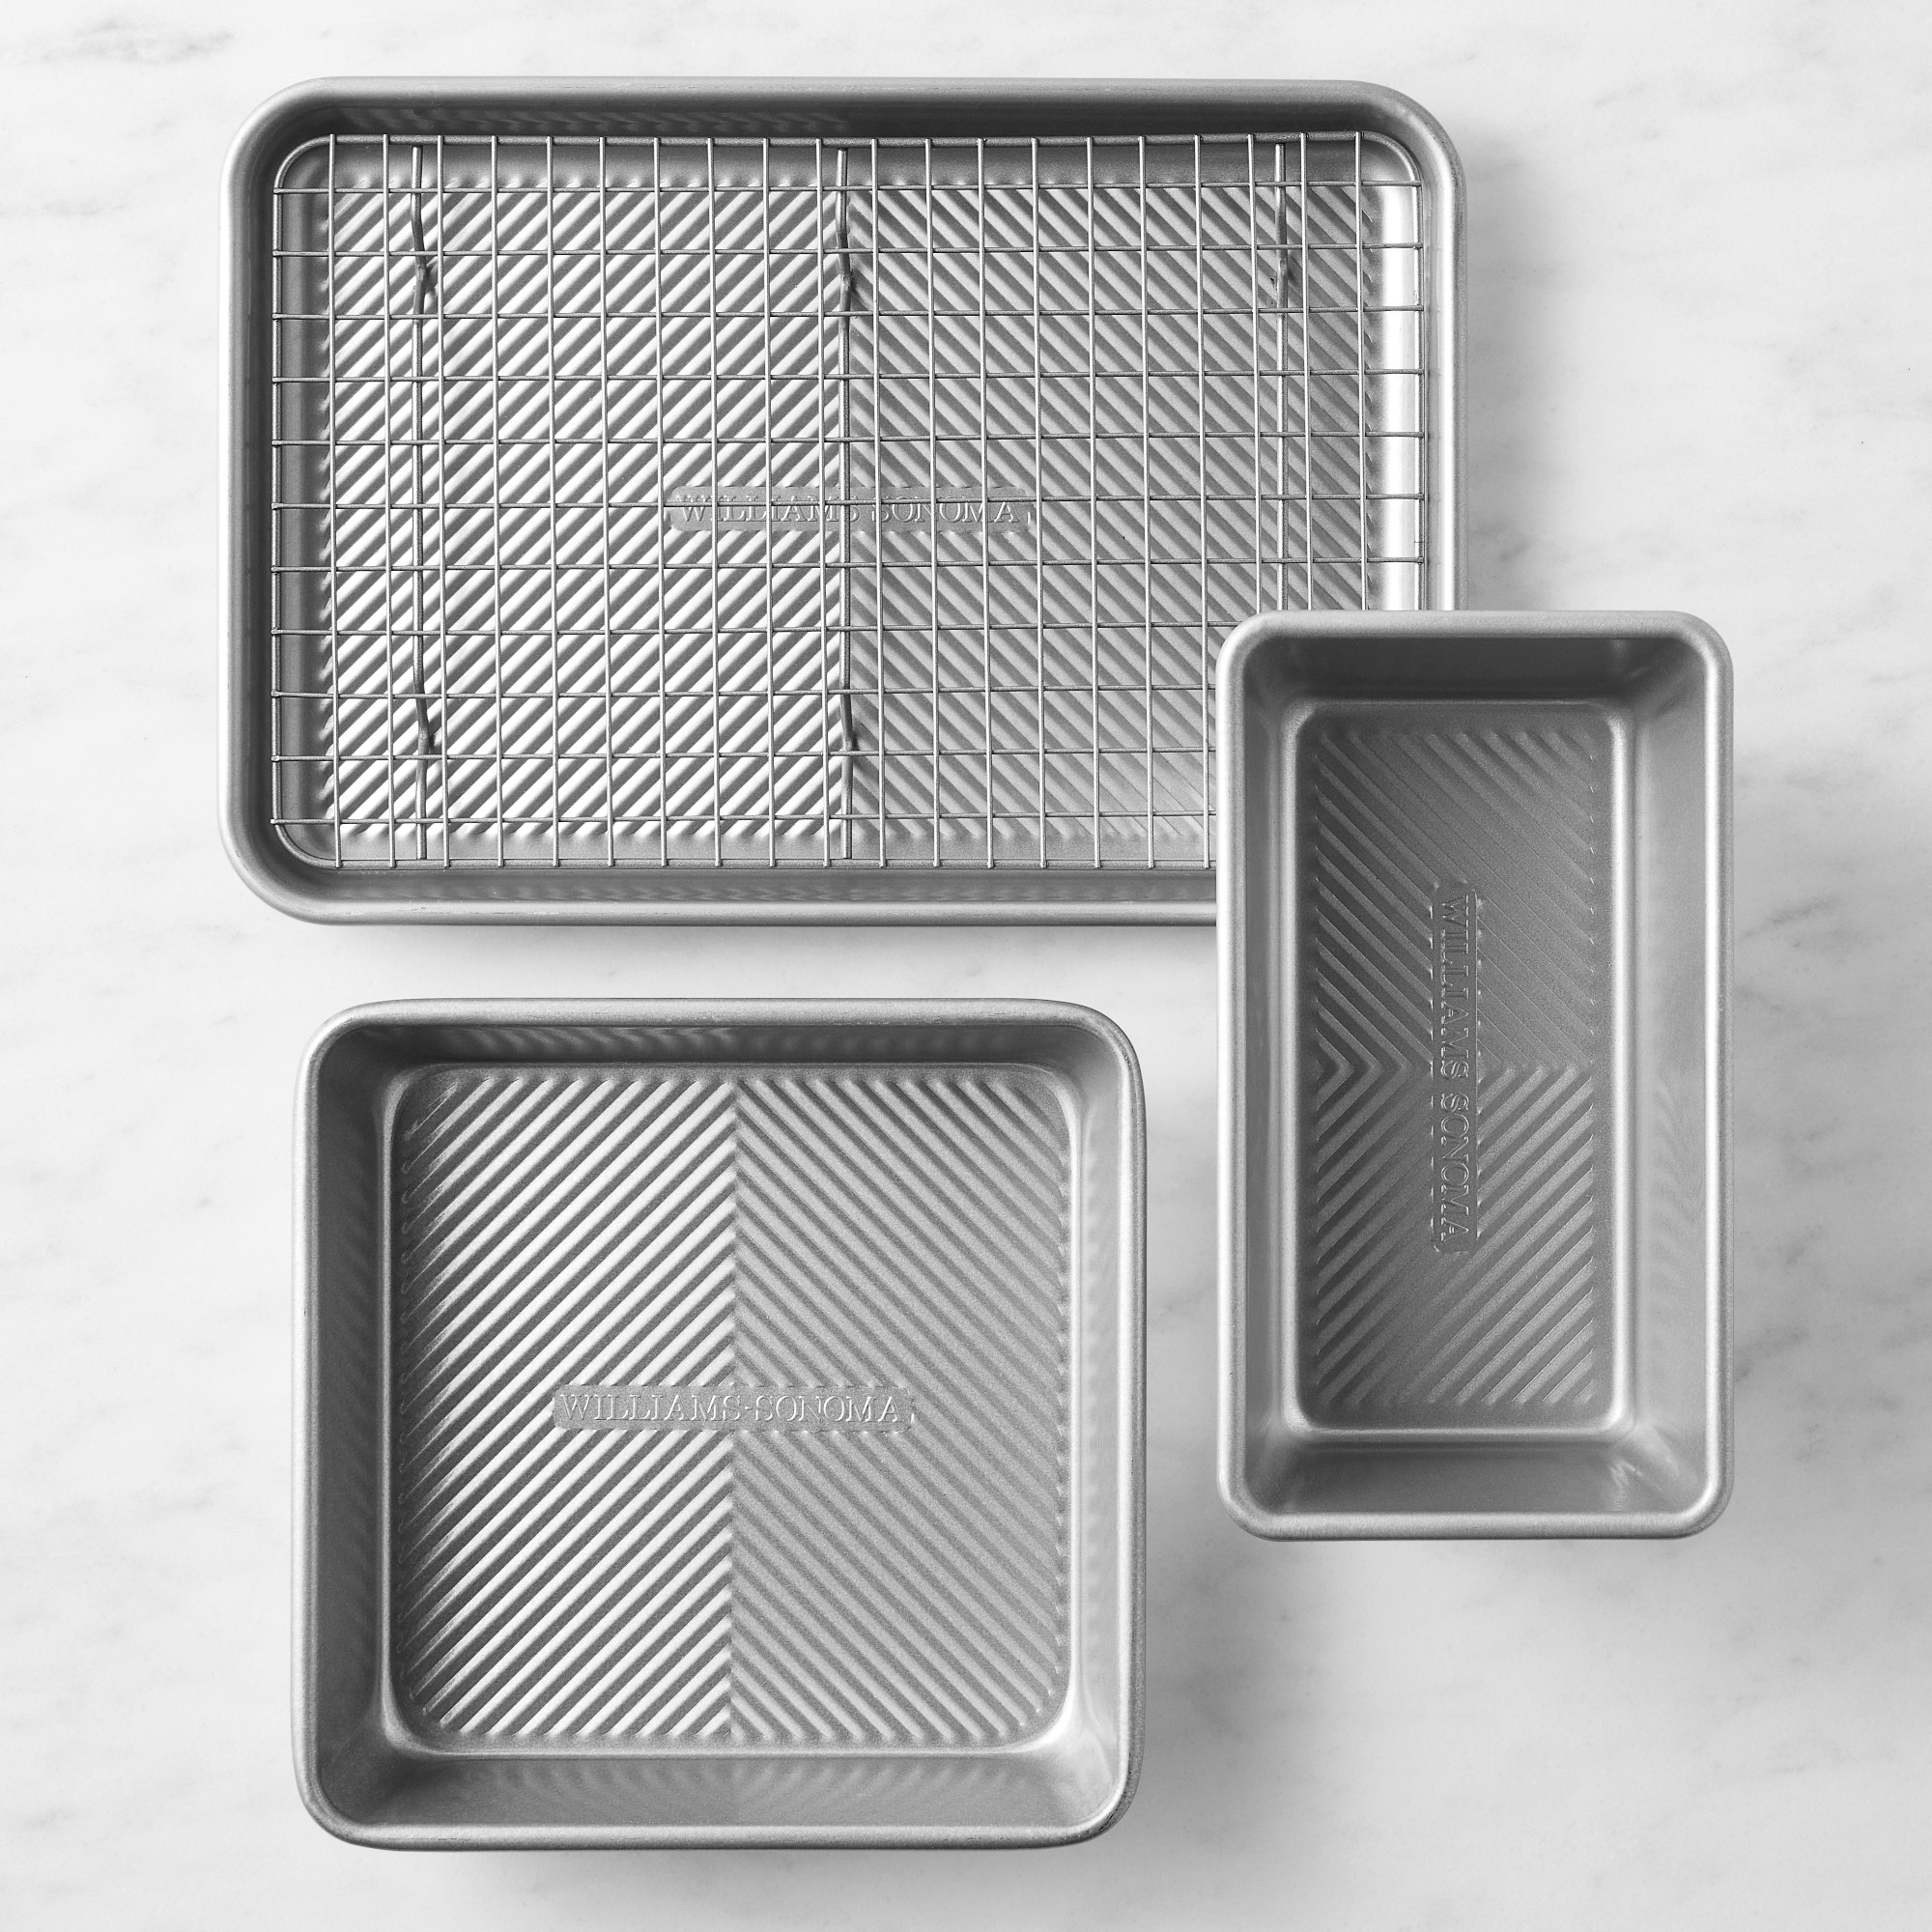 Williams Sonoma Nonstick Cleartouch Toaster Oven Bakeware, Set of 4